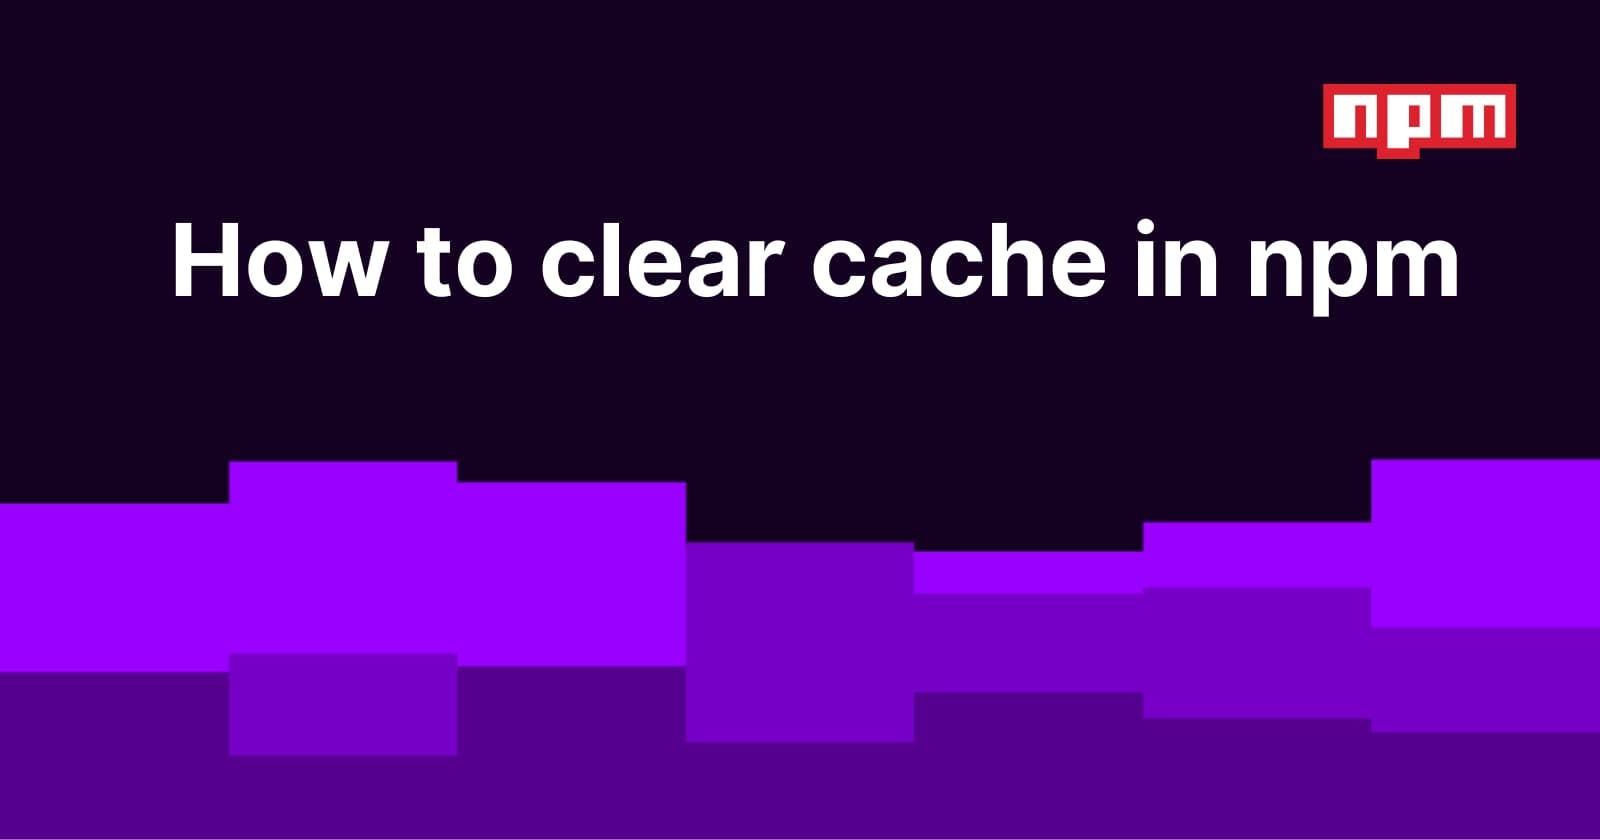 How to clear cache in npm